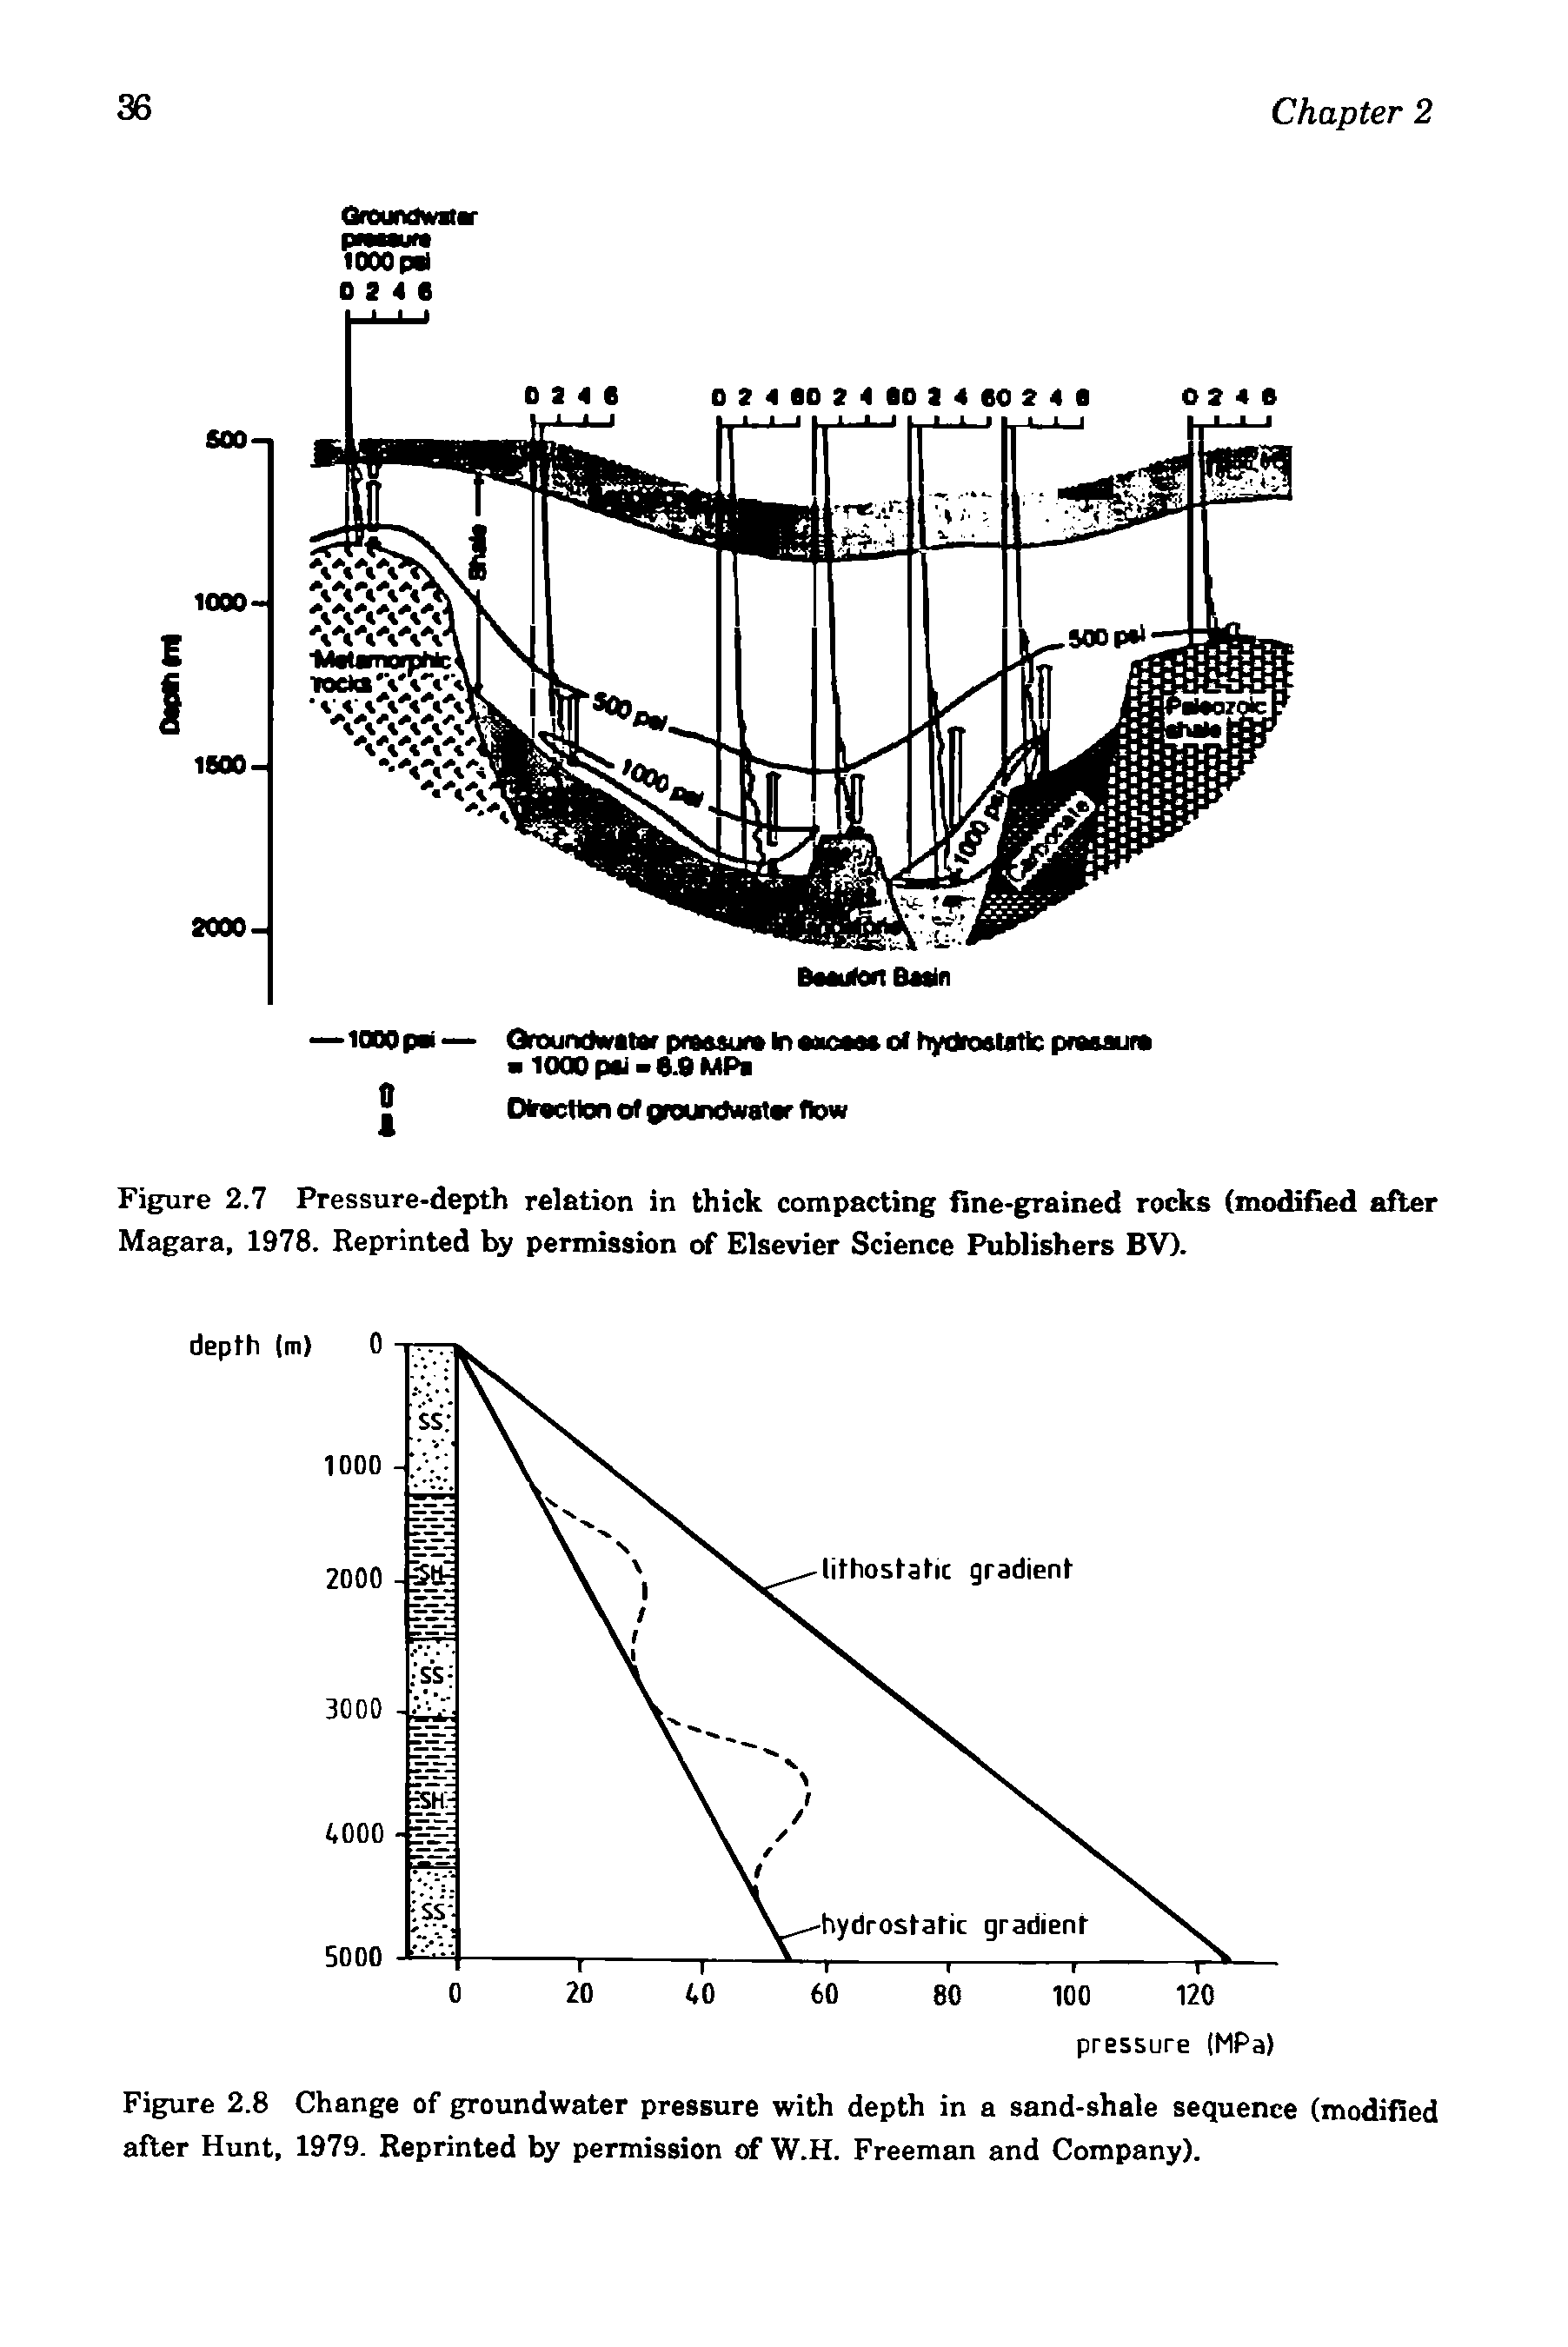 Figure 2.7 Pressure-depth relation in thick compacting fine-grained rocks (modified after Magara, 1978. Reprinted by permission of Elsevier Science Publishers BV).